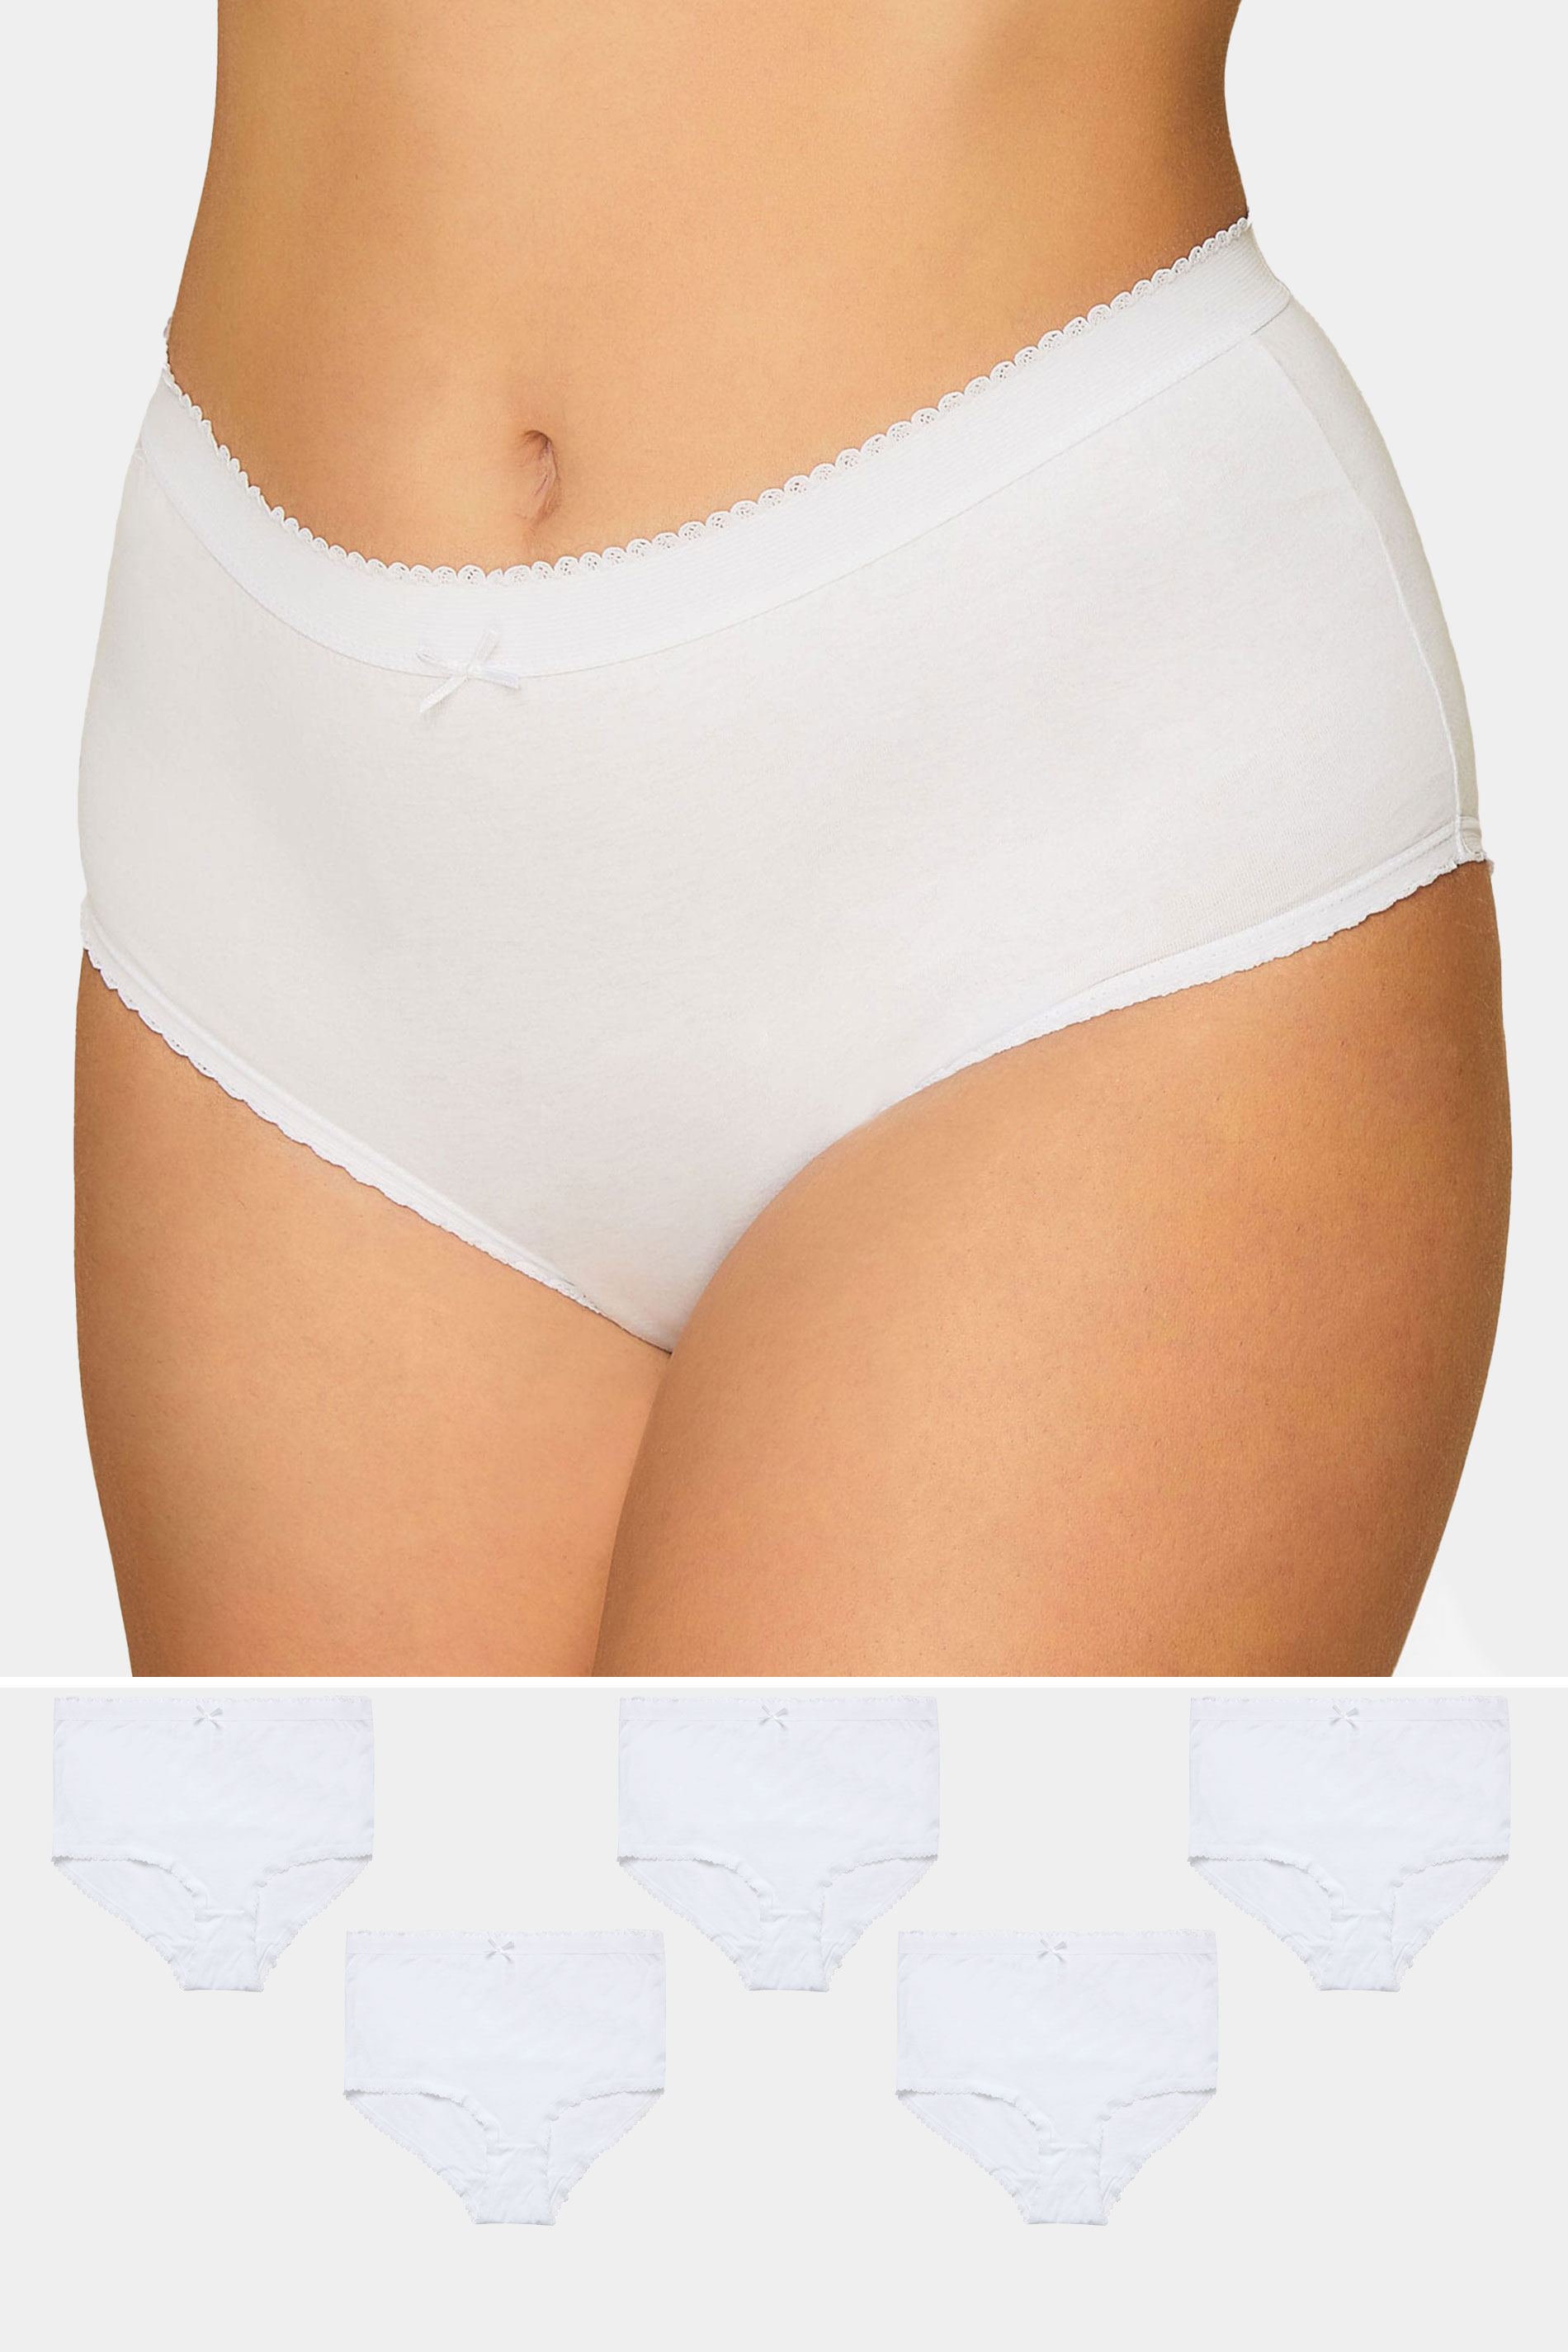 5 PACK Curve White Cotton High Waisted Full Briefs | Yours Clothing 1